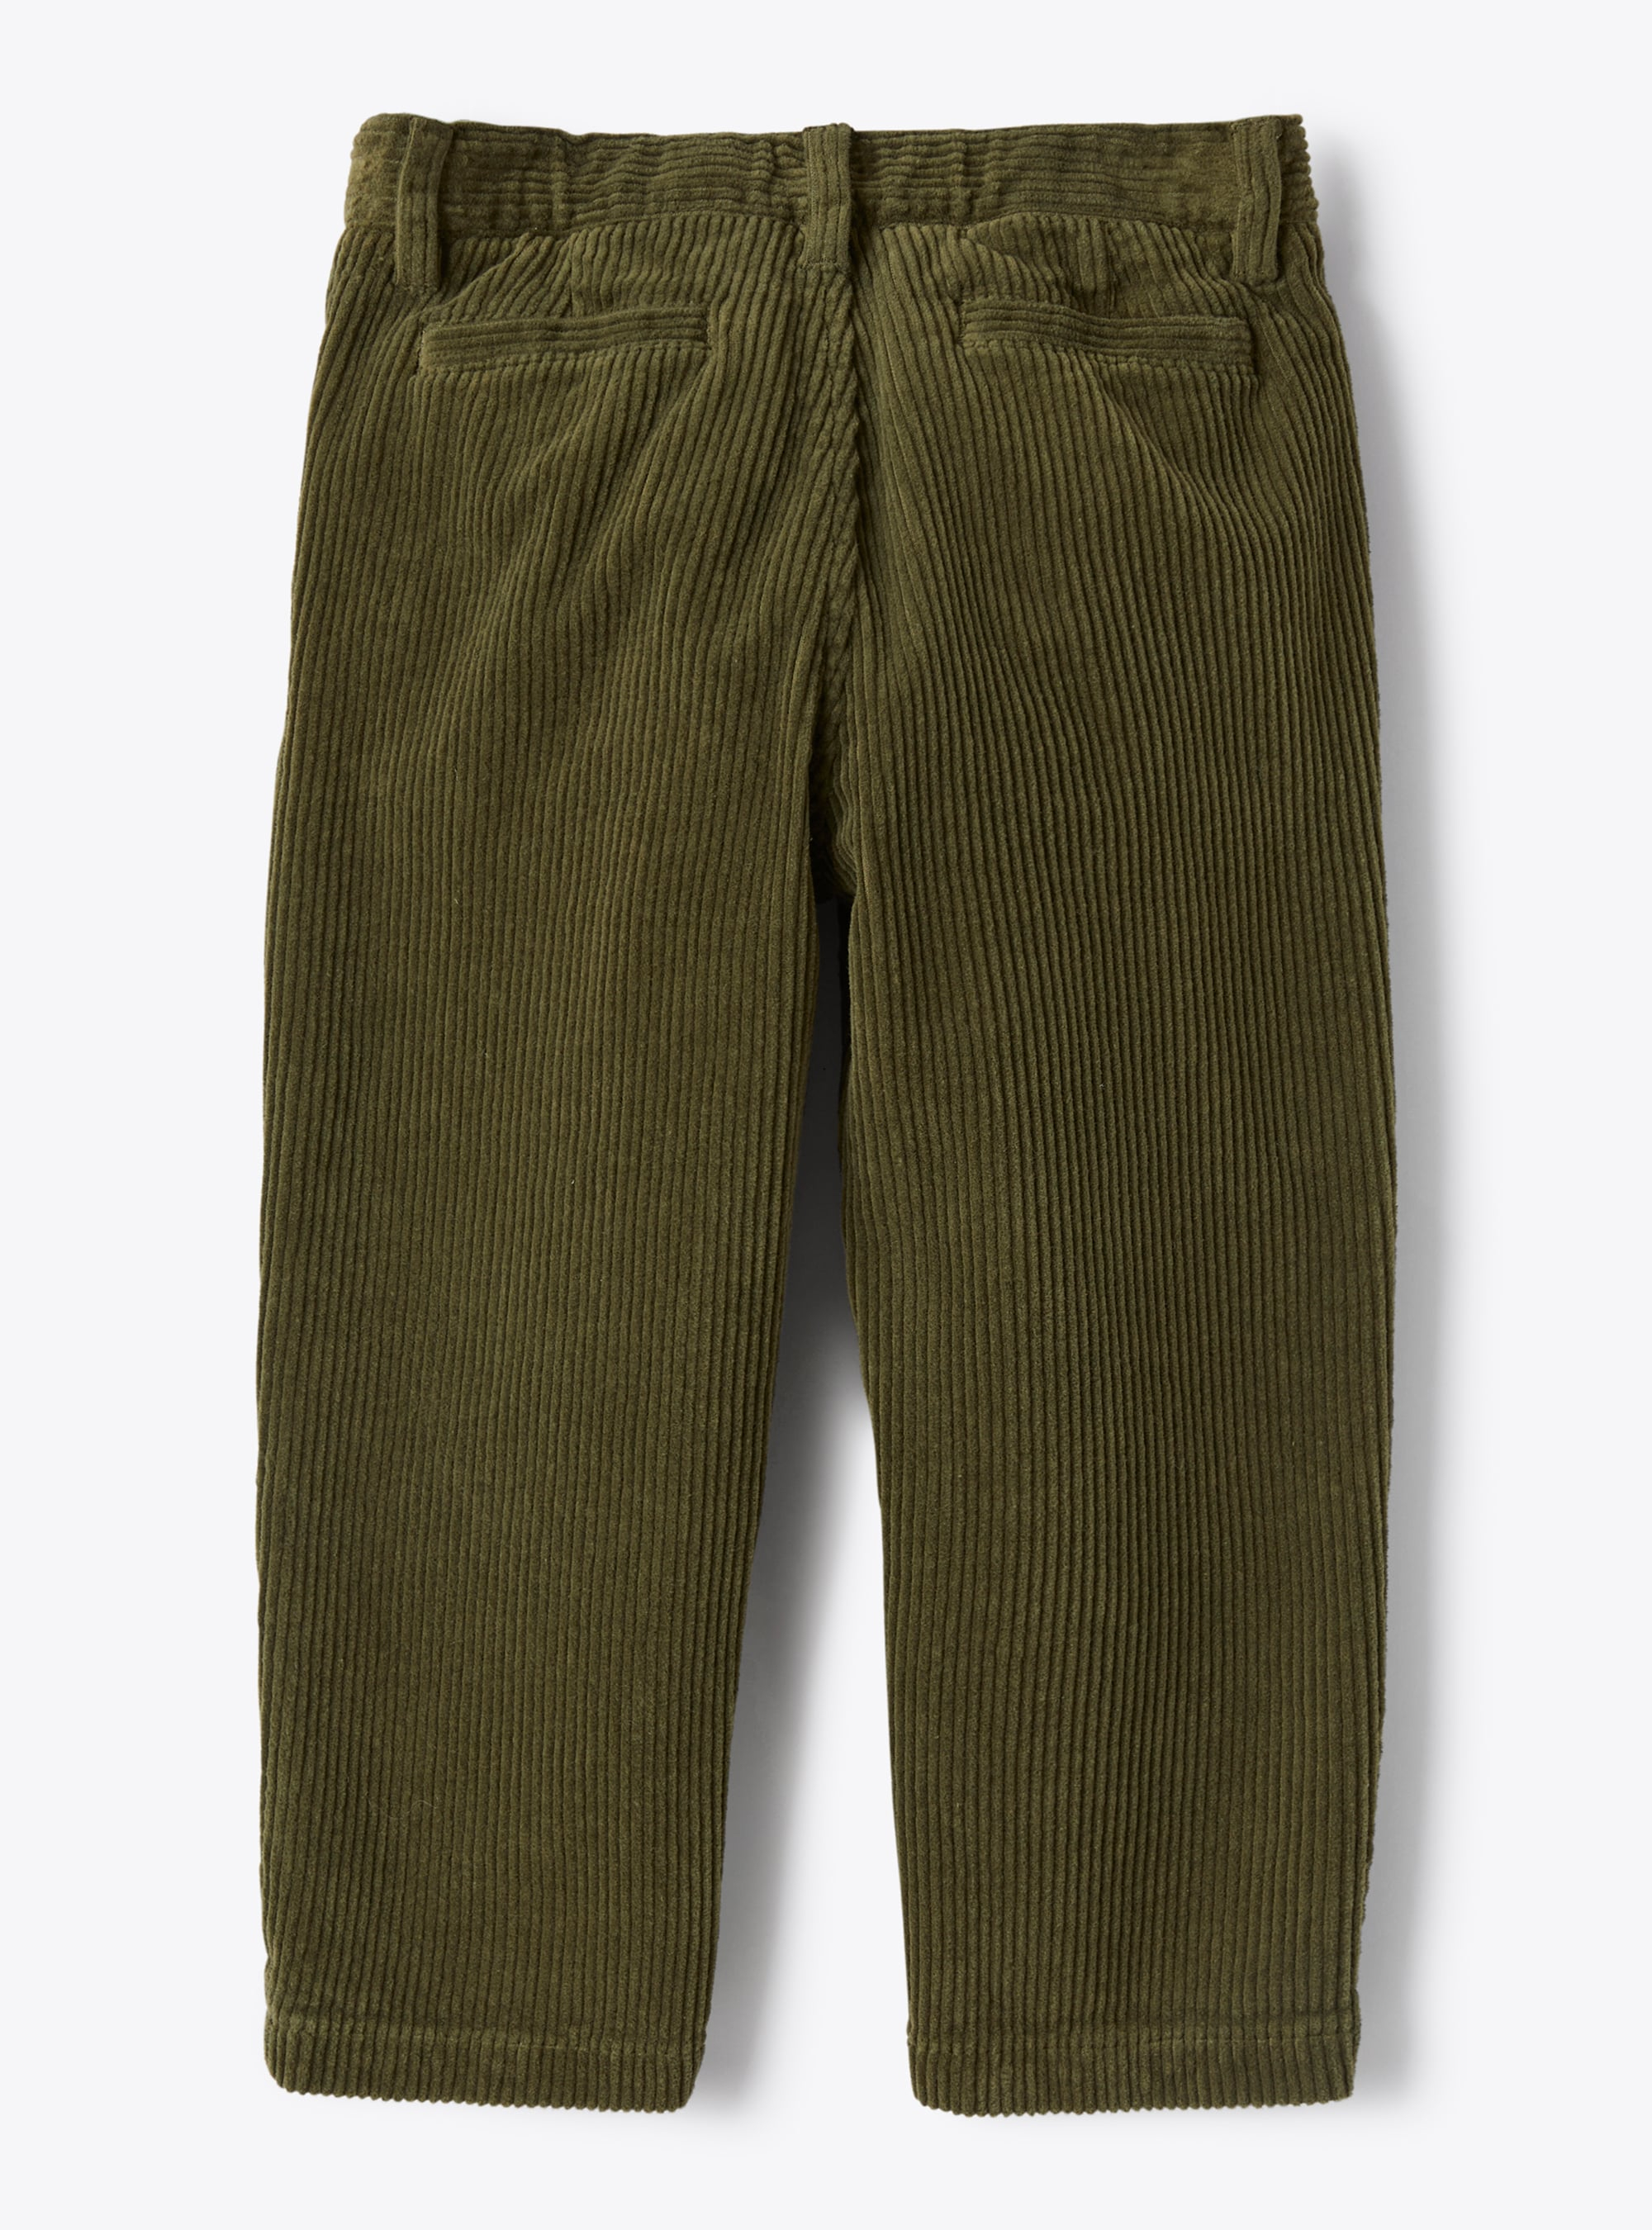 Olive green corduroy trousers - Green | Il Gufo